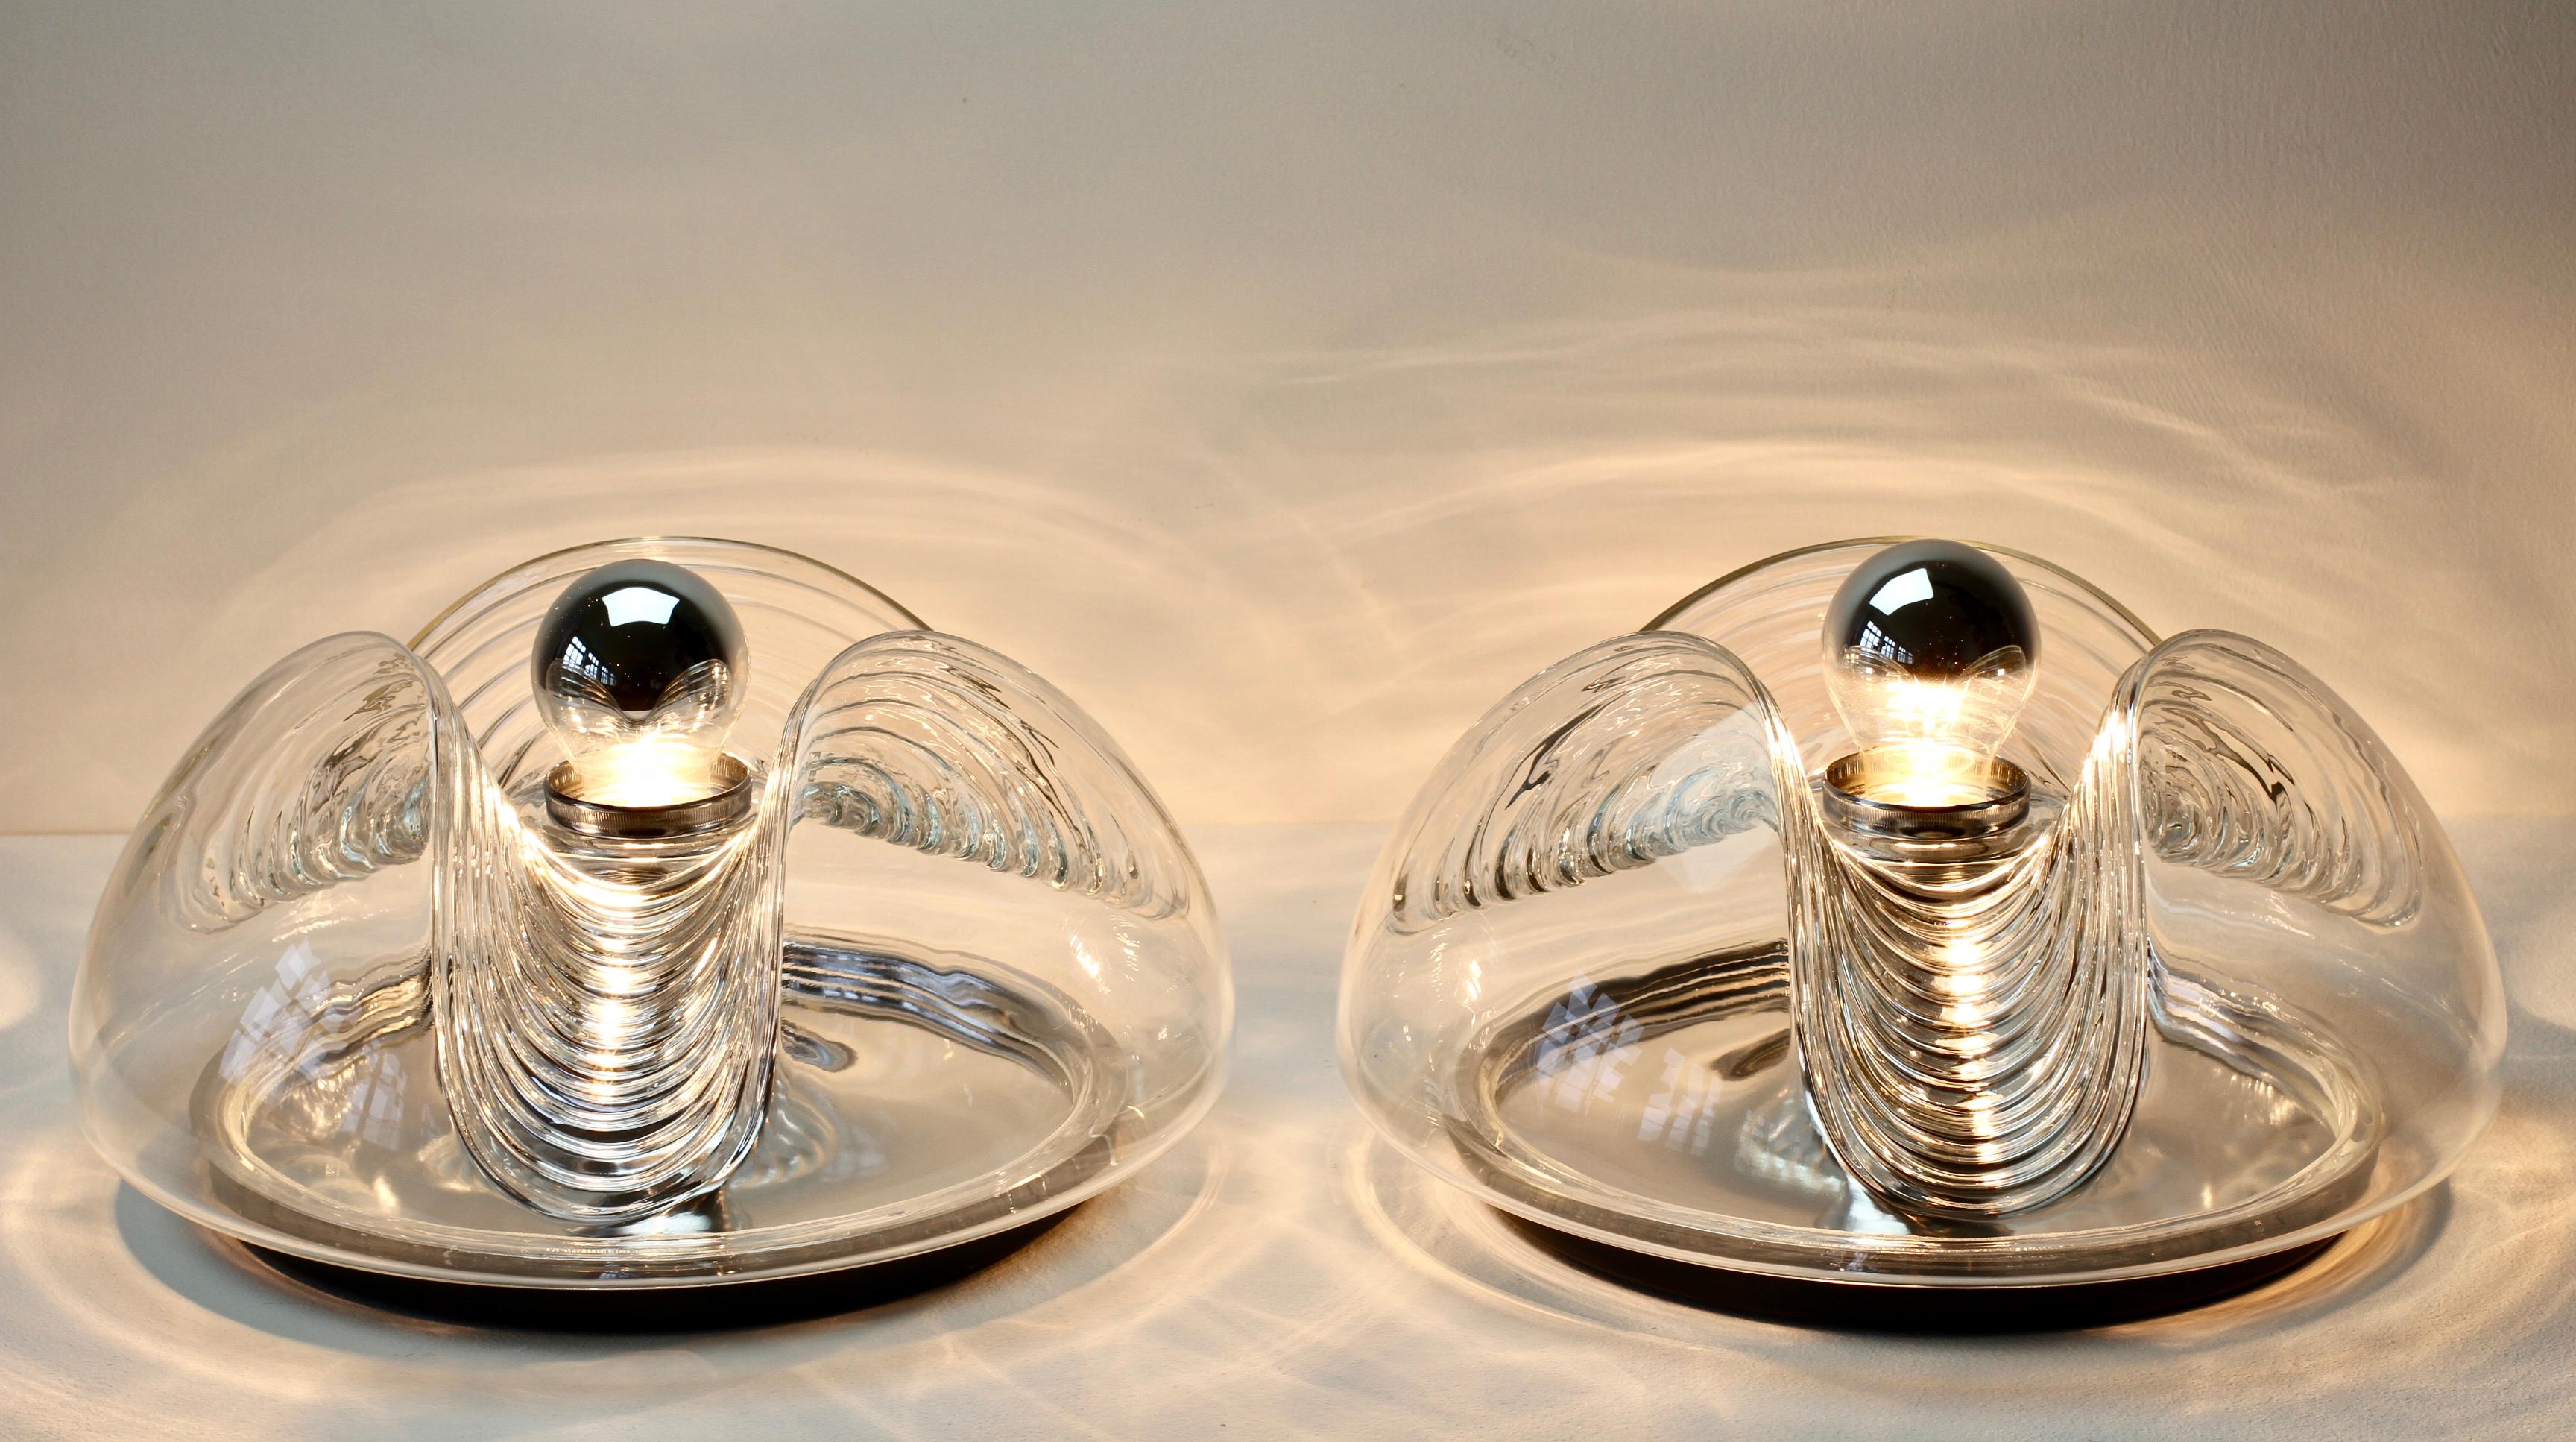 1 of 4 Peill & Putzler 1970s Vintage Clear Glass Biomorphic Wall Lights Sconces 2